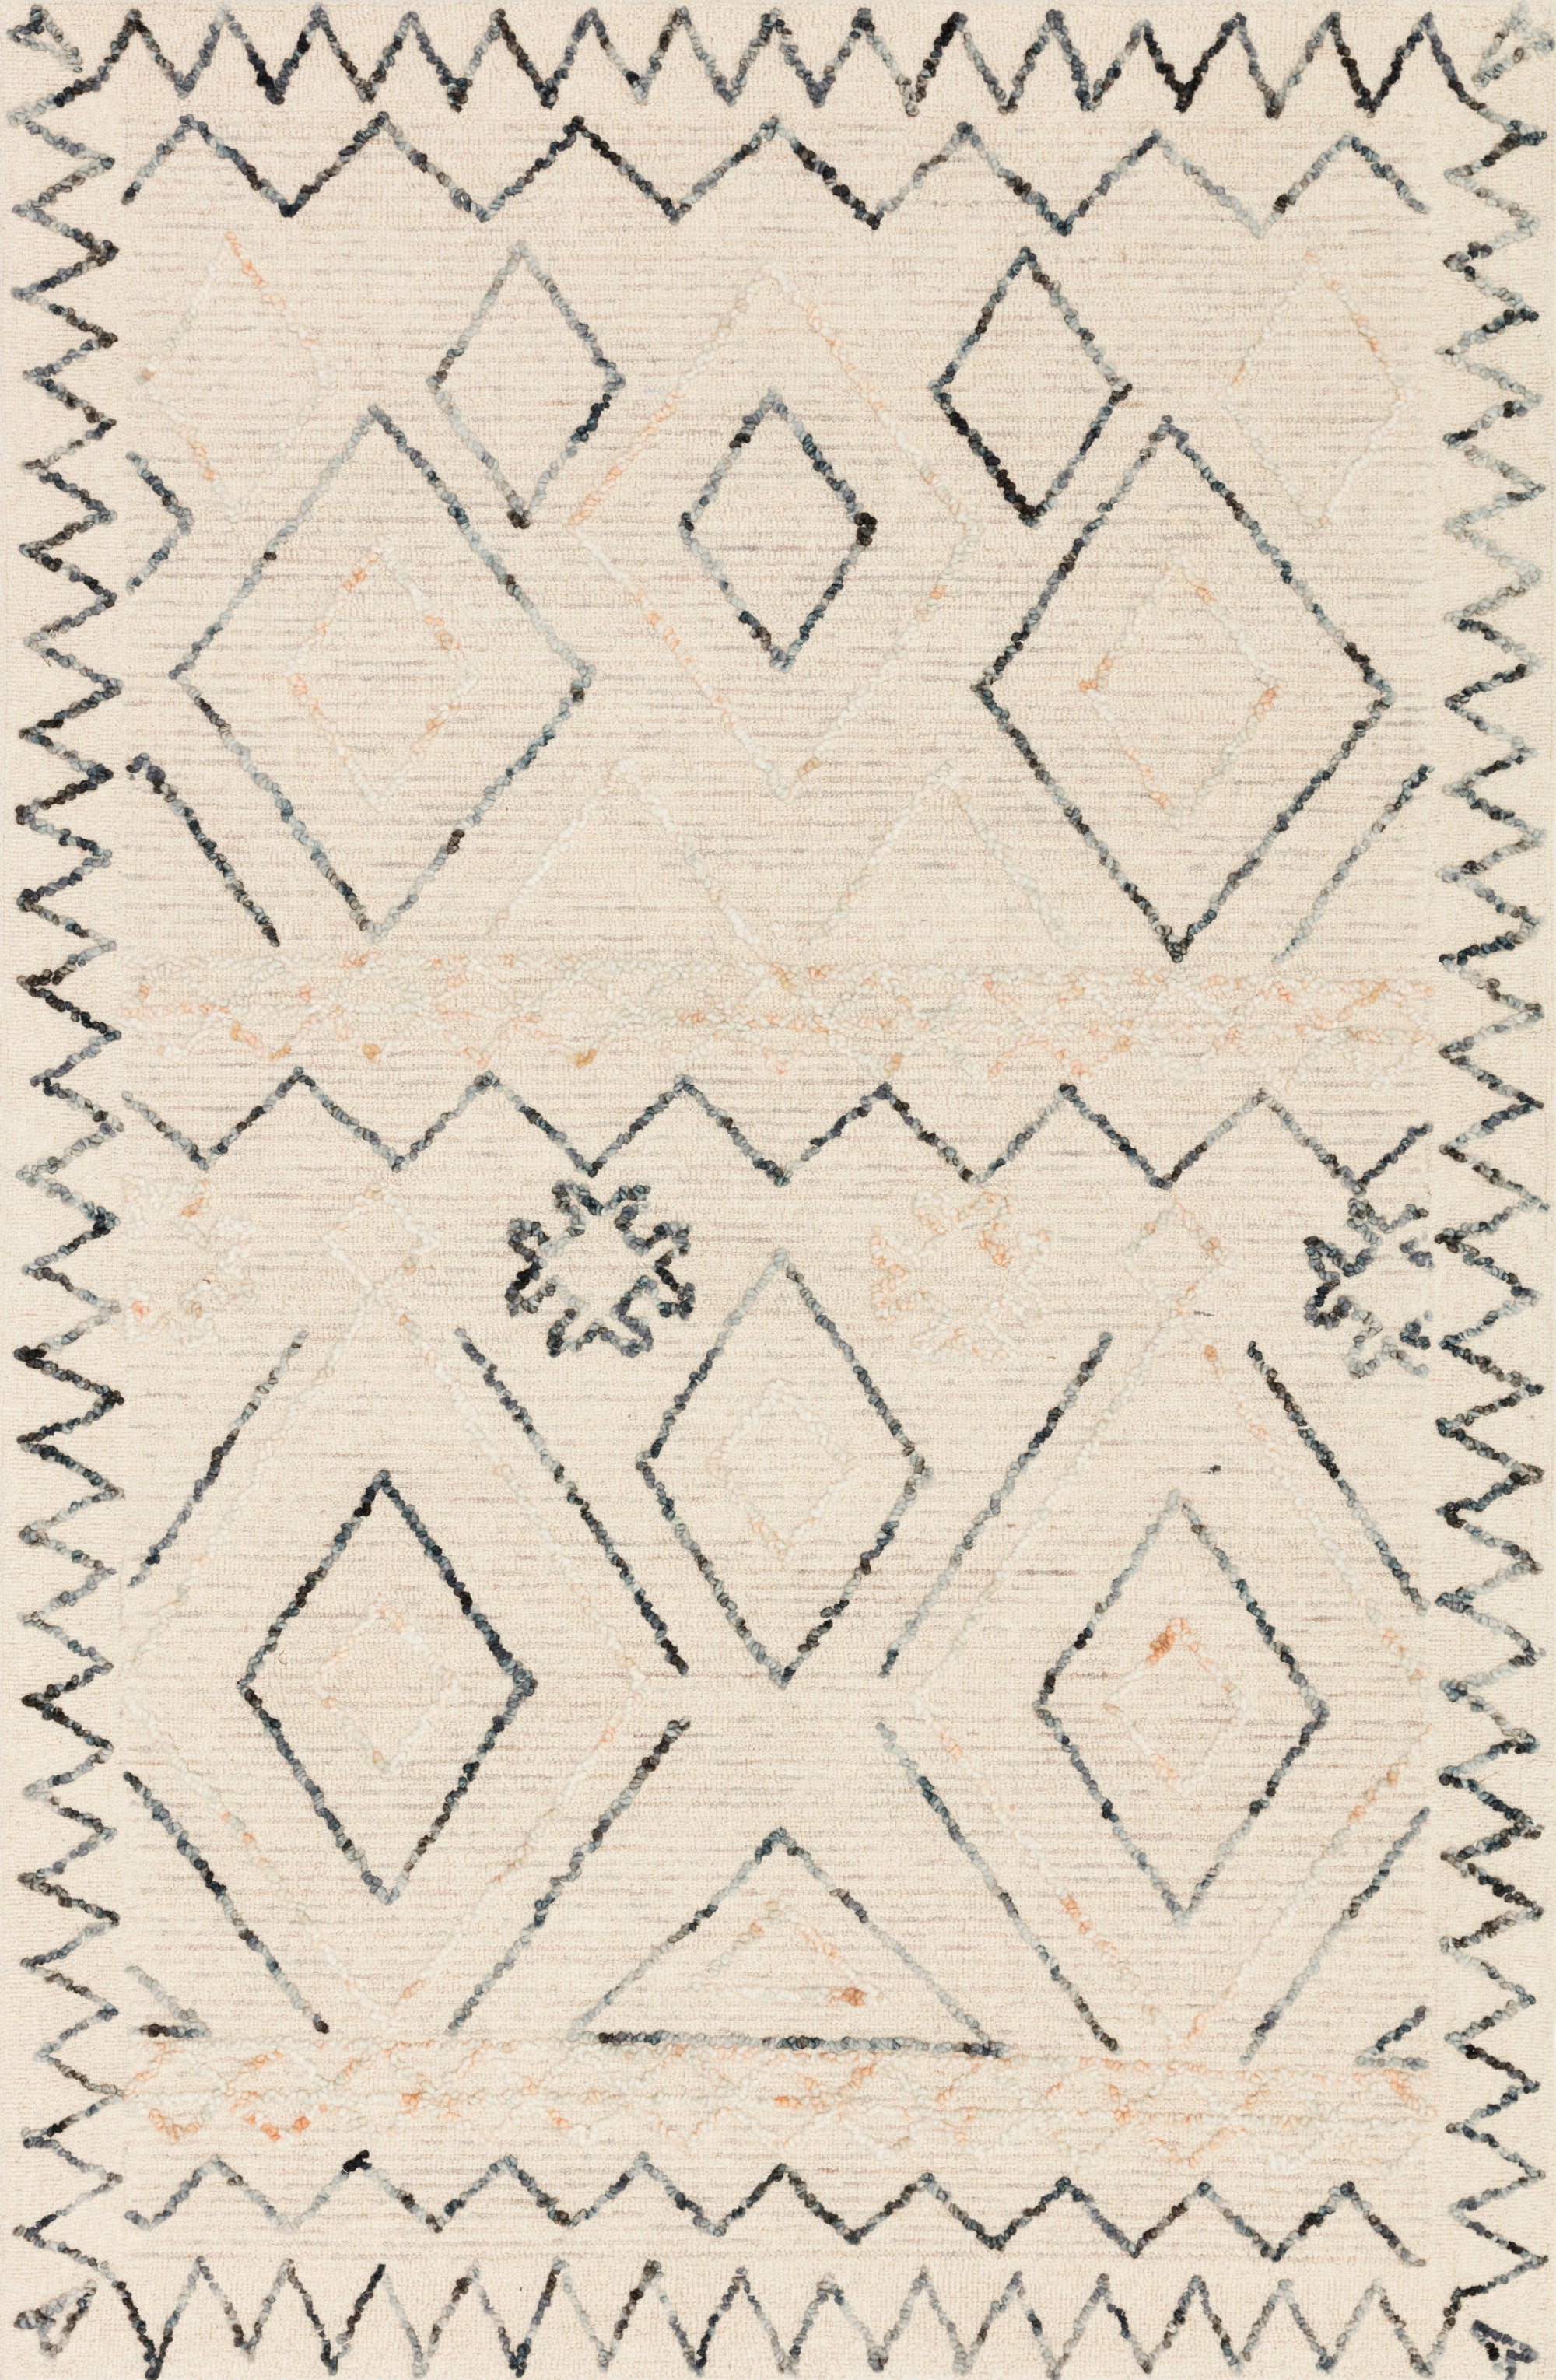 Experience Visual Movement: Leela II Rug Collection by Loloi